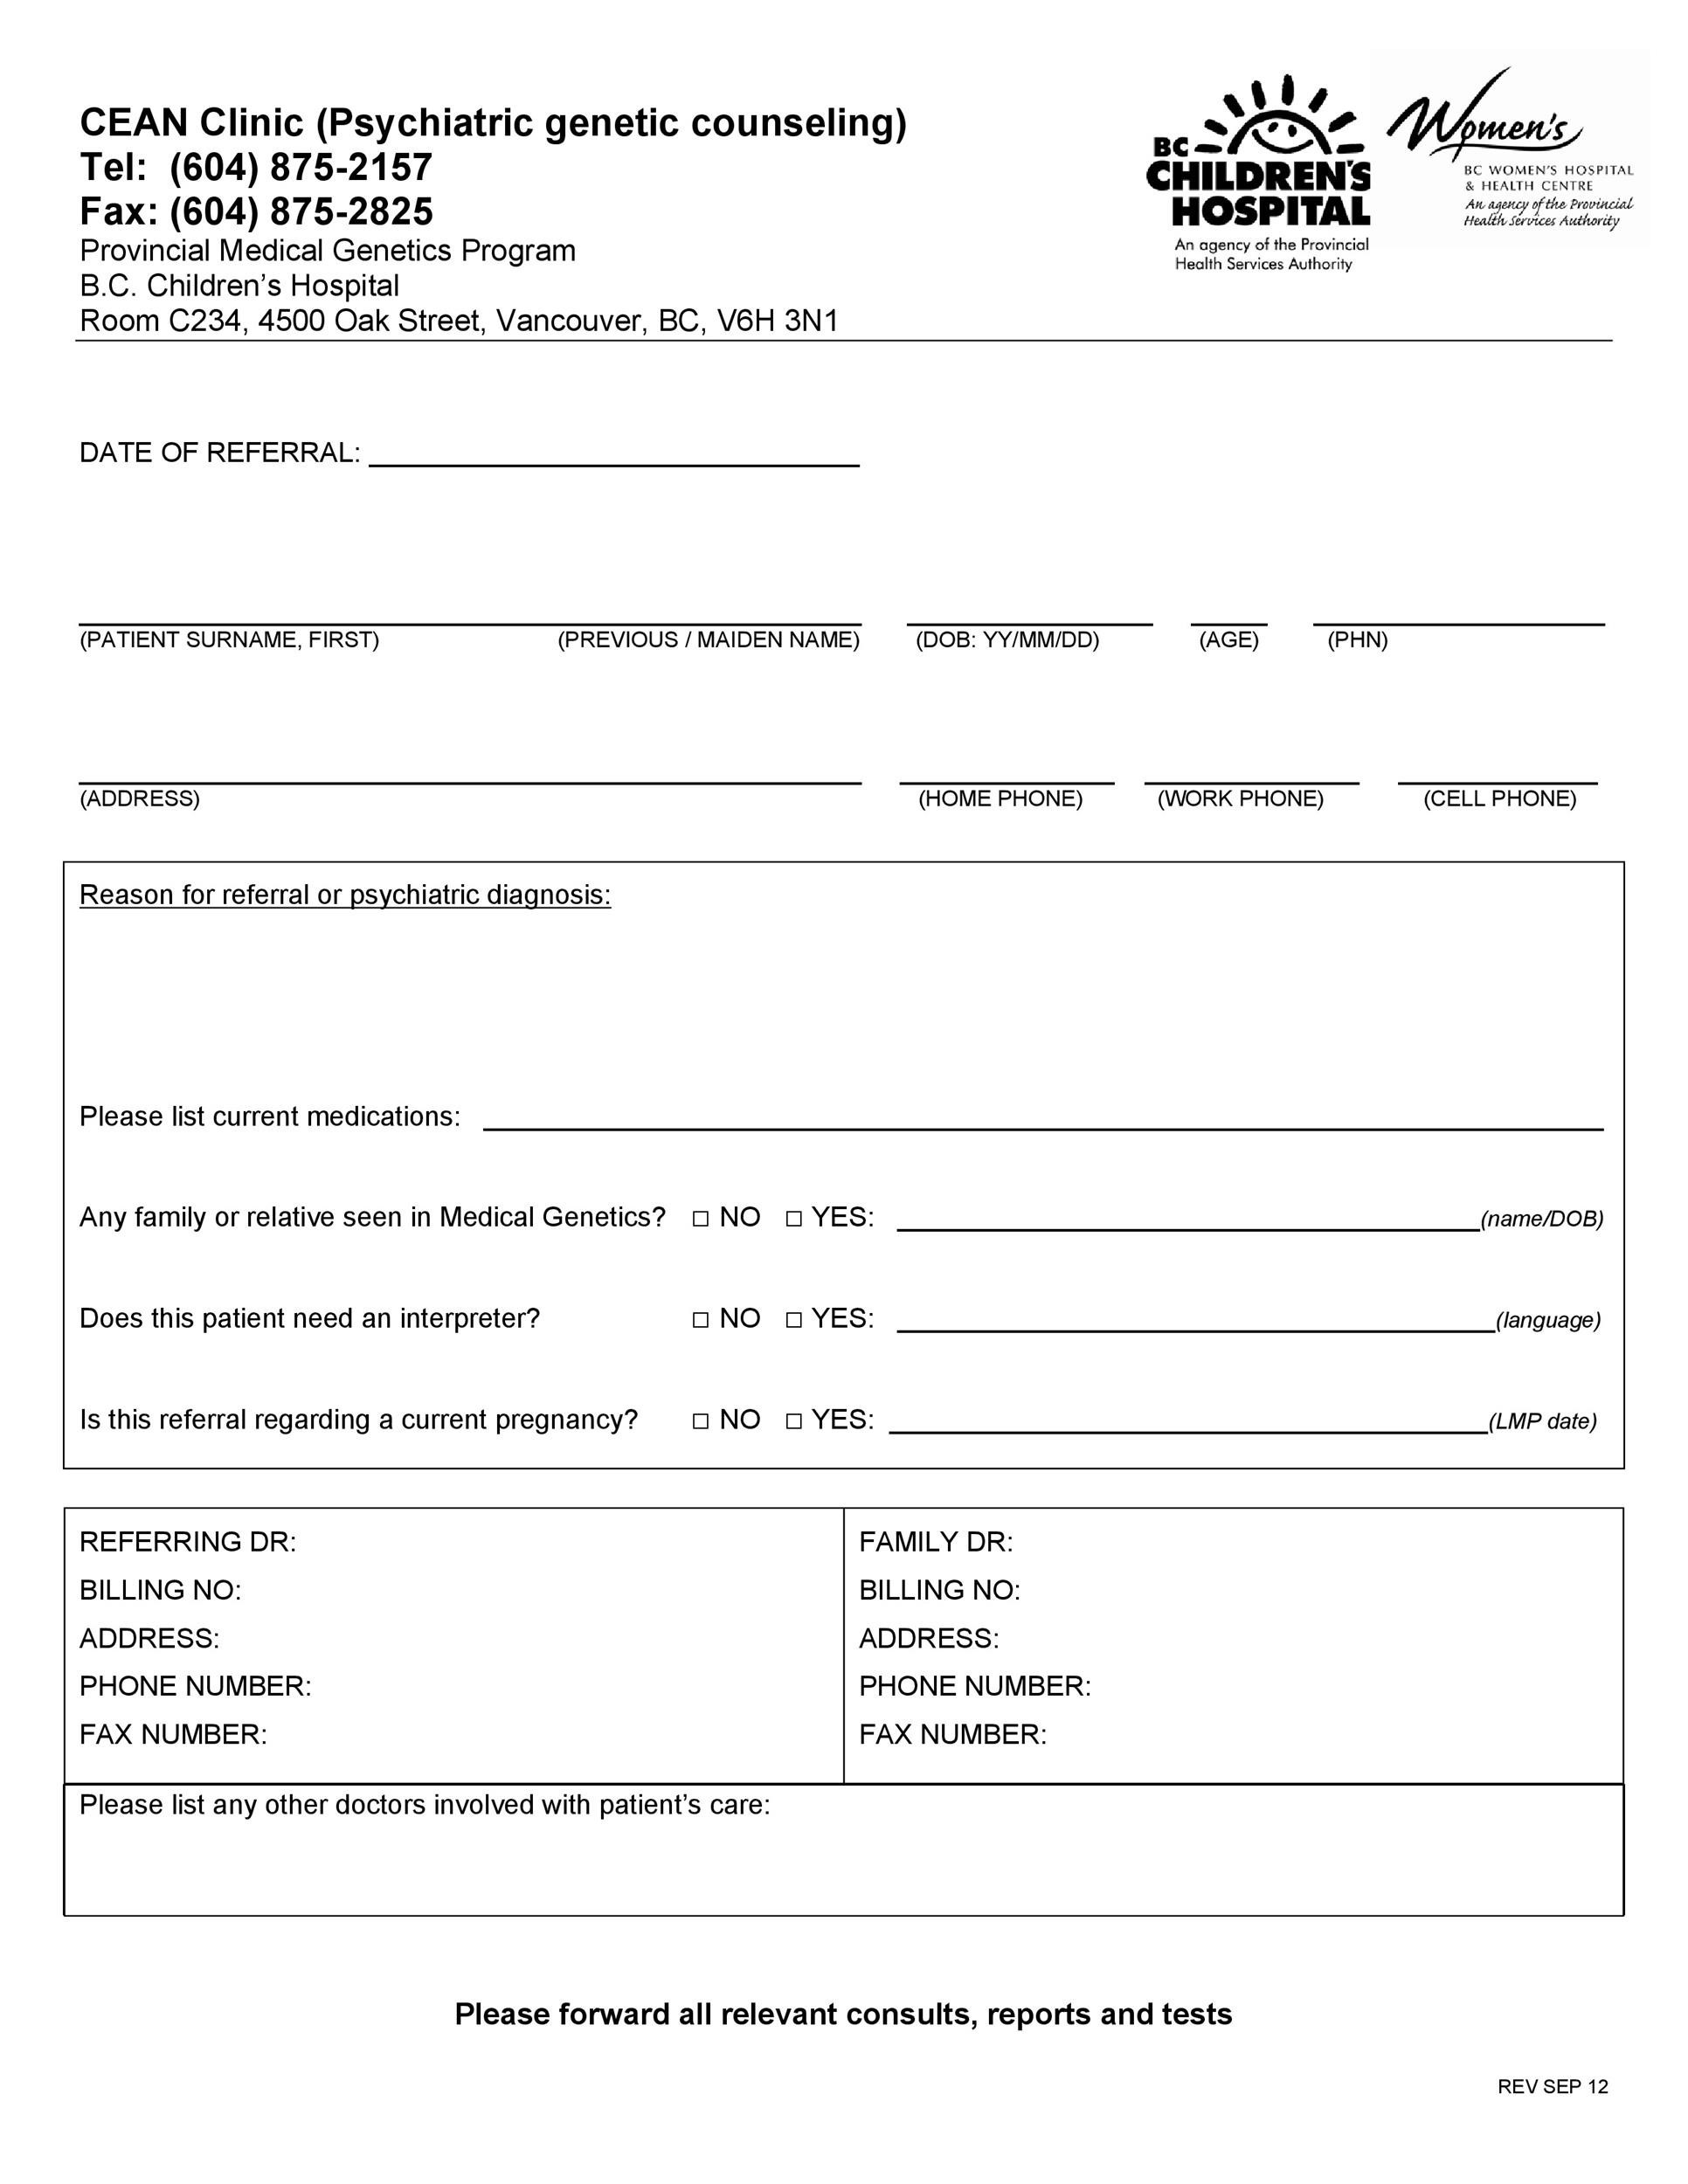 50 Referral Form Templates Medical And General Templatelab 0853